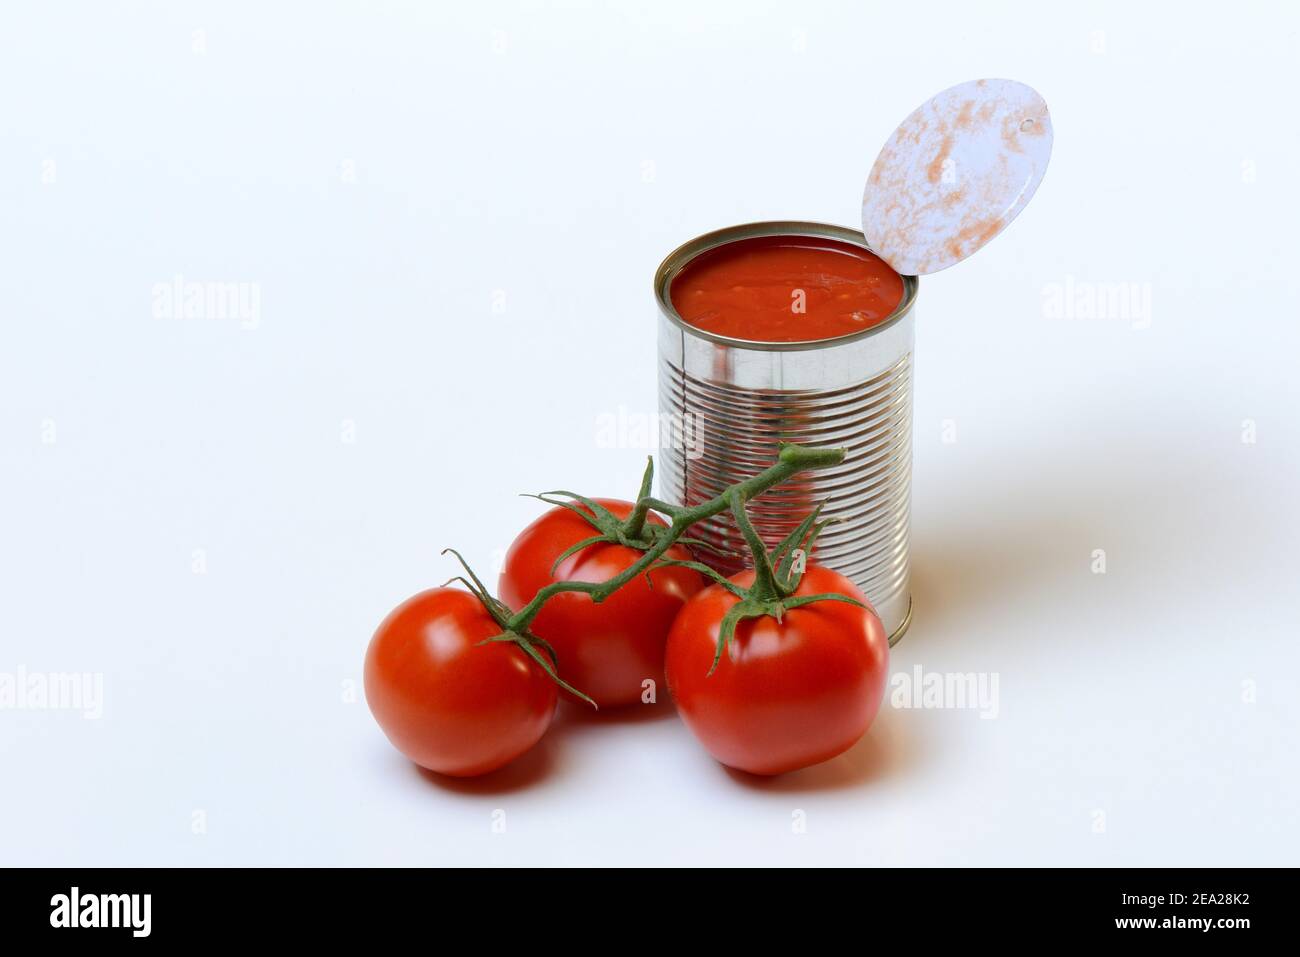 Opened tin of canned tomatoes and ripe tomatoes Stock Photo